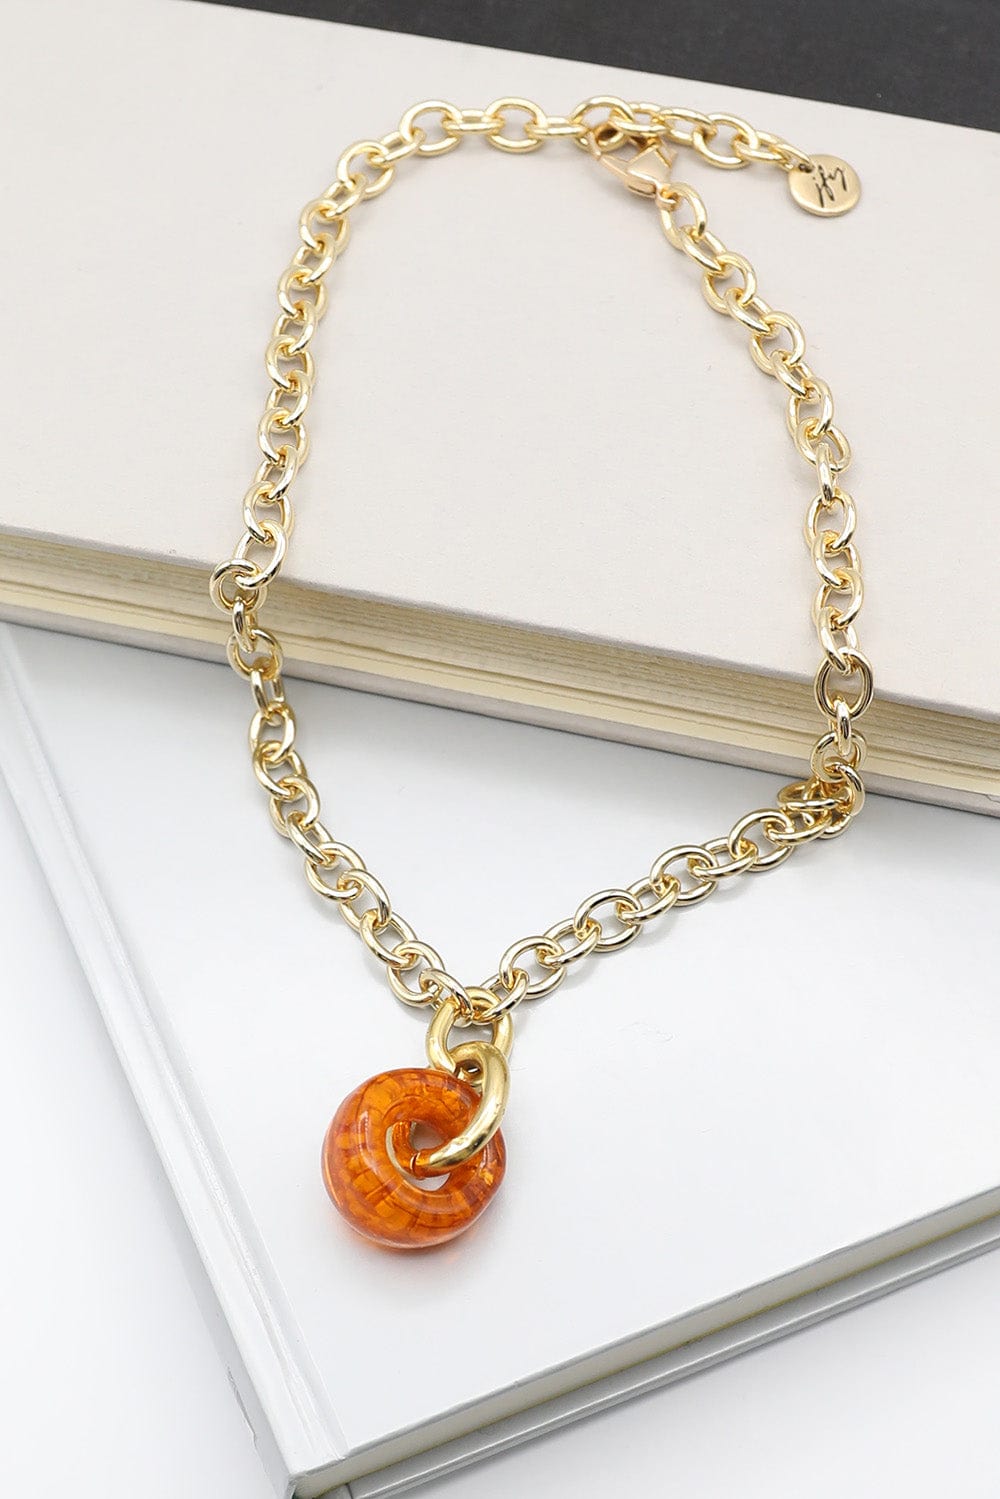 Necklace with Chunky Orange Resin Bead on Gold Chain